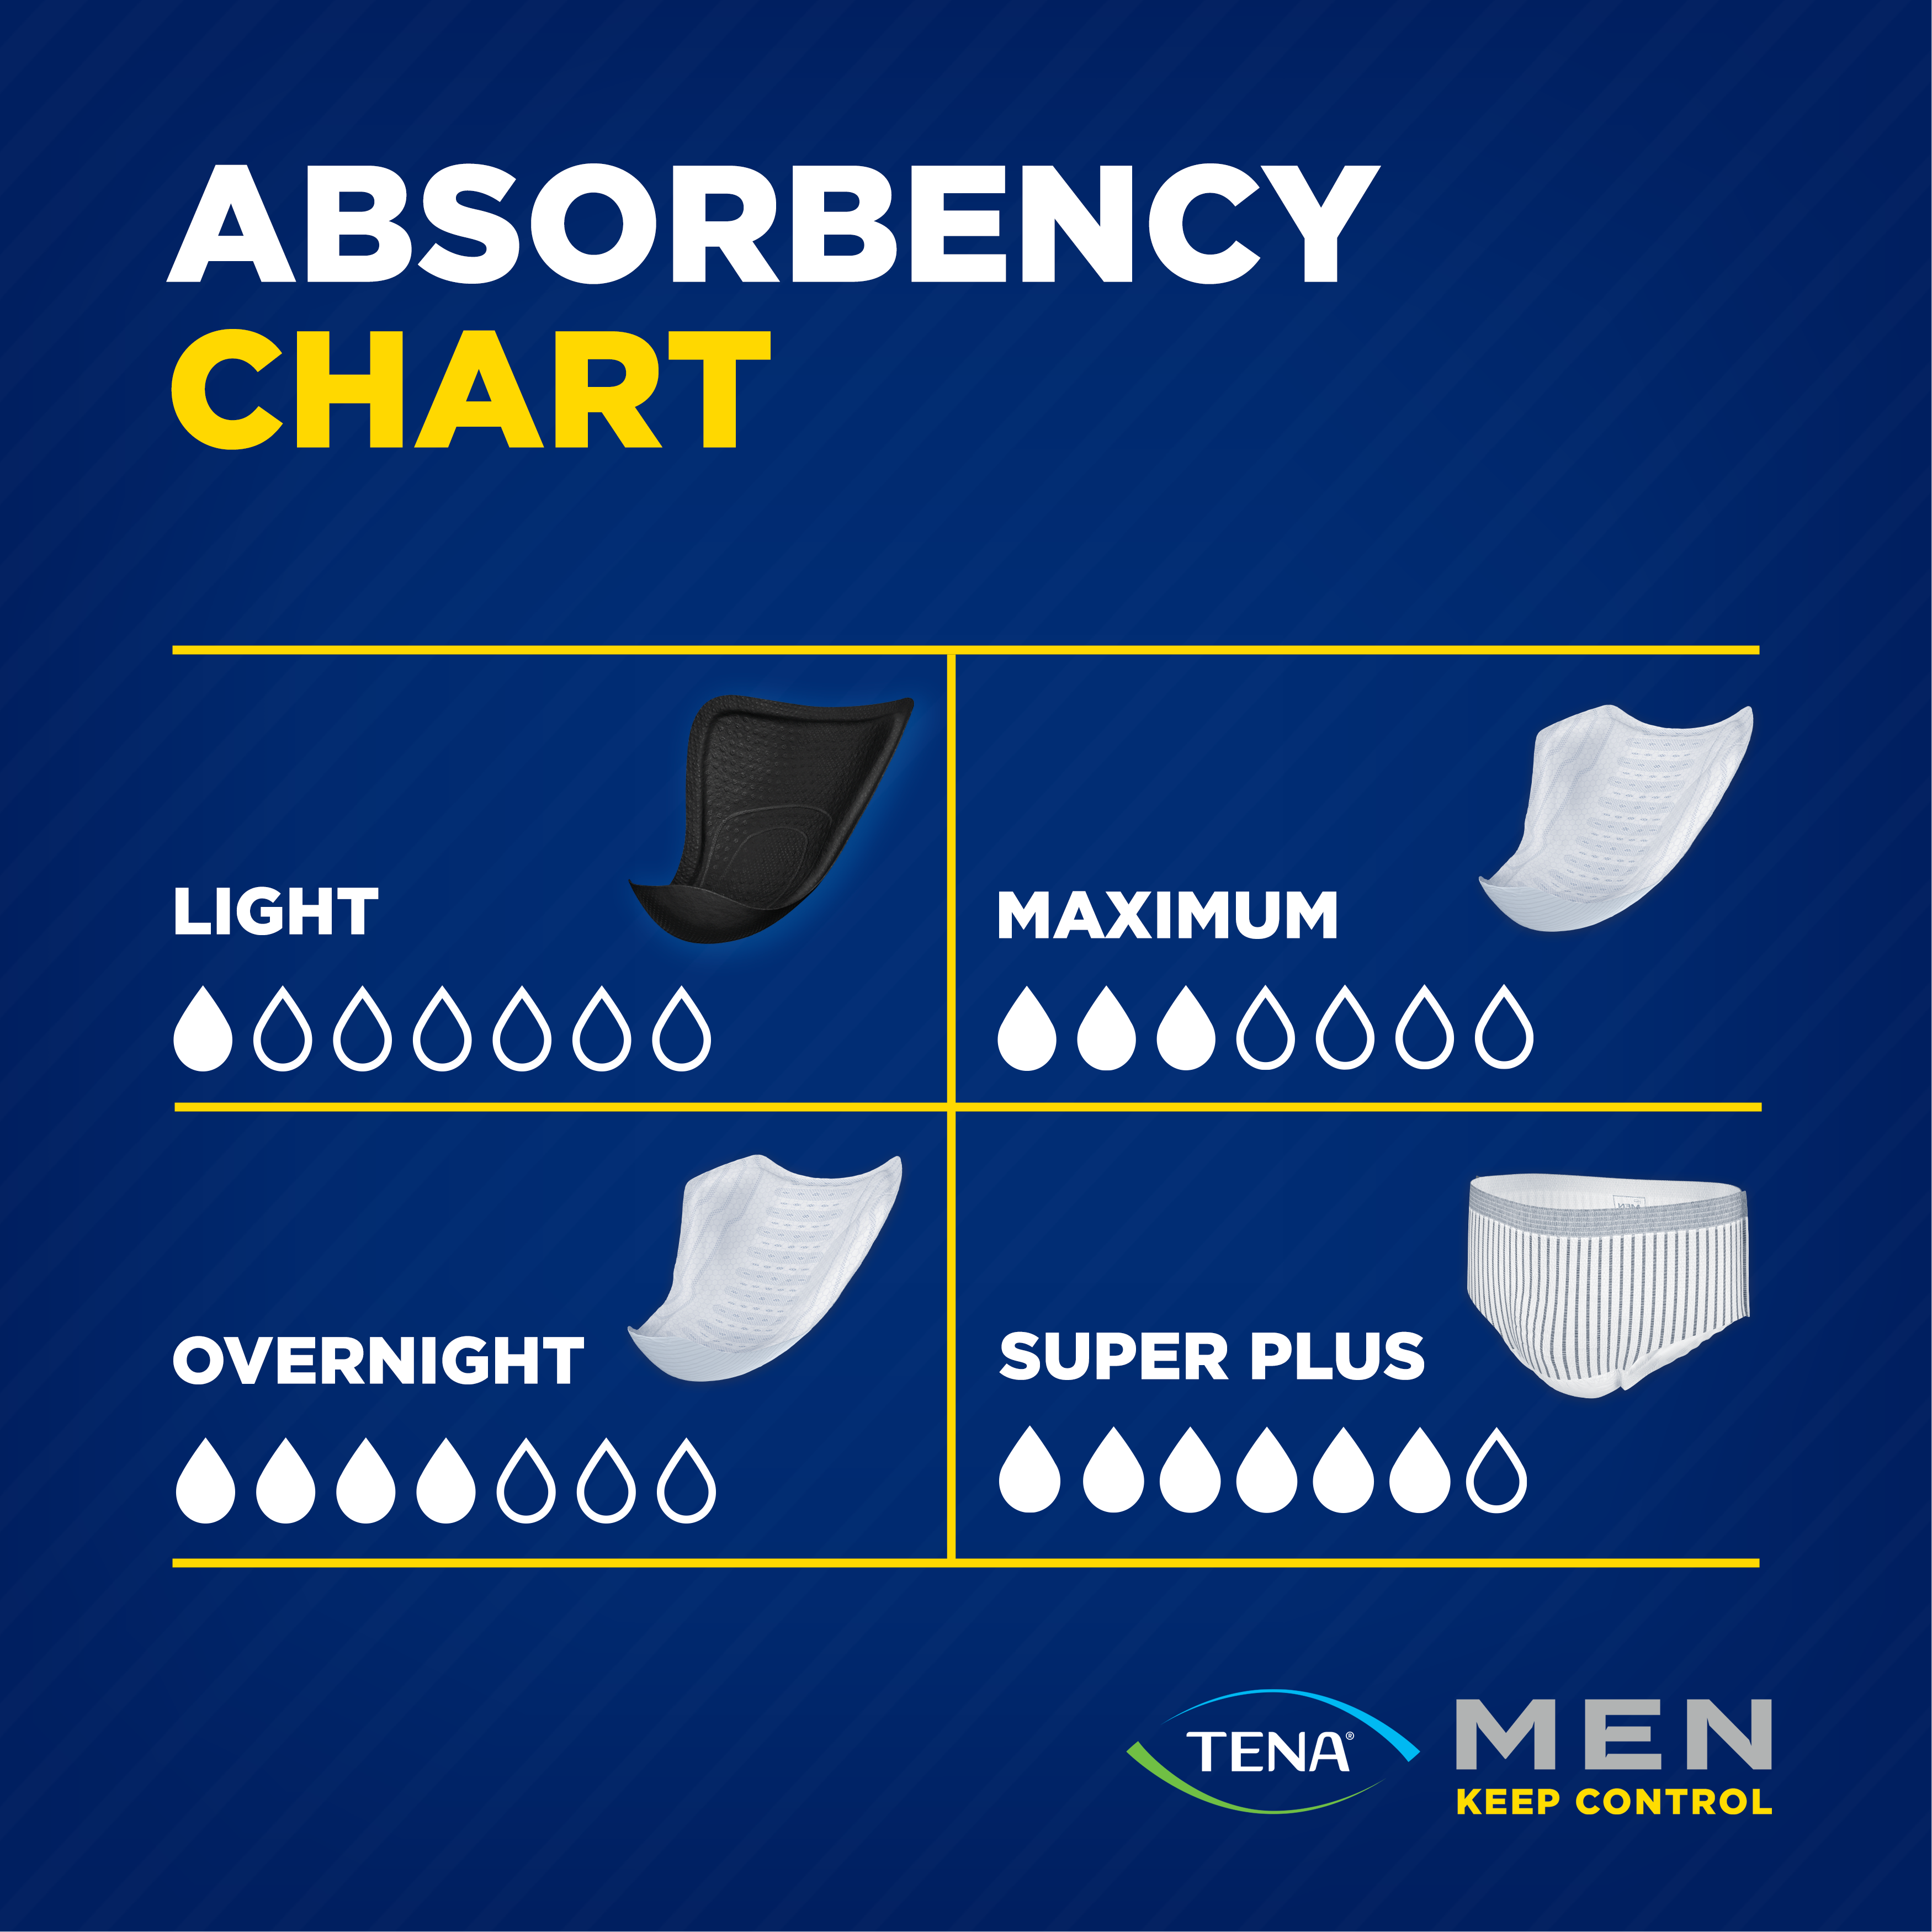 An absorbency chart with maximum providing moderate protection